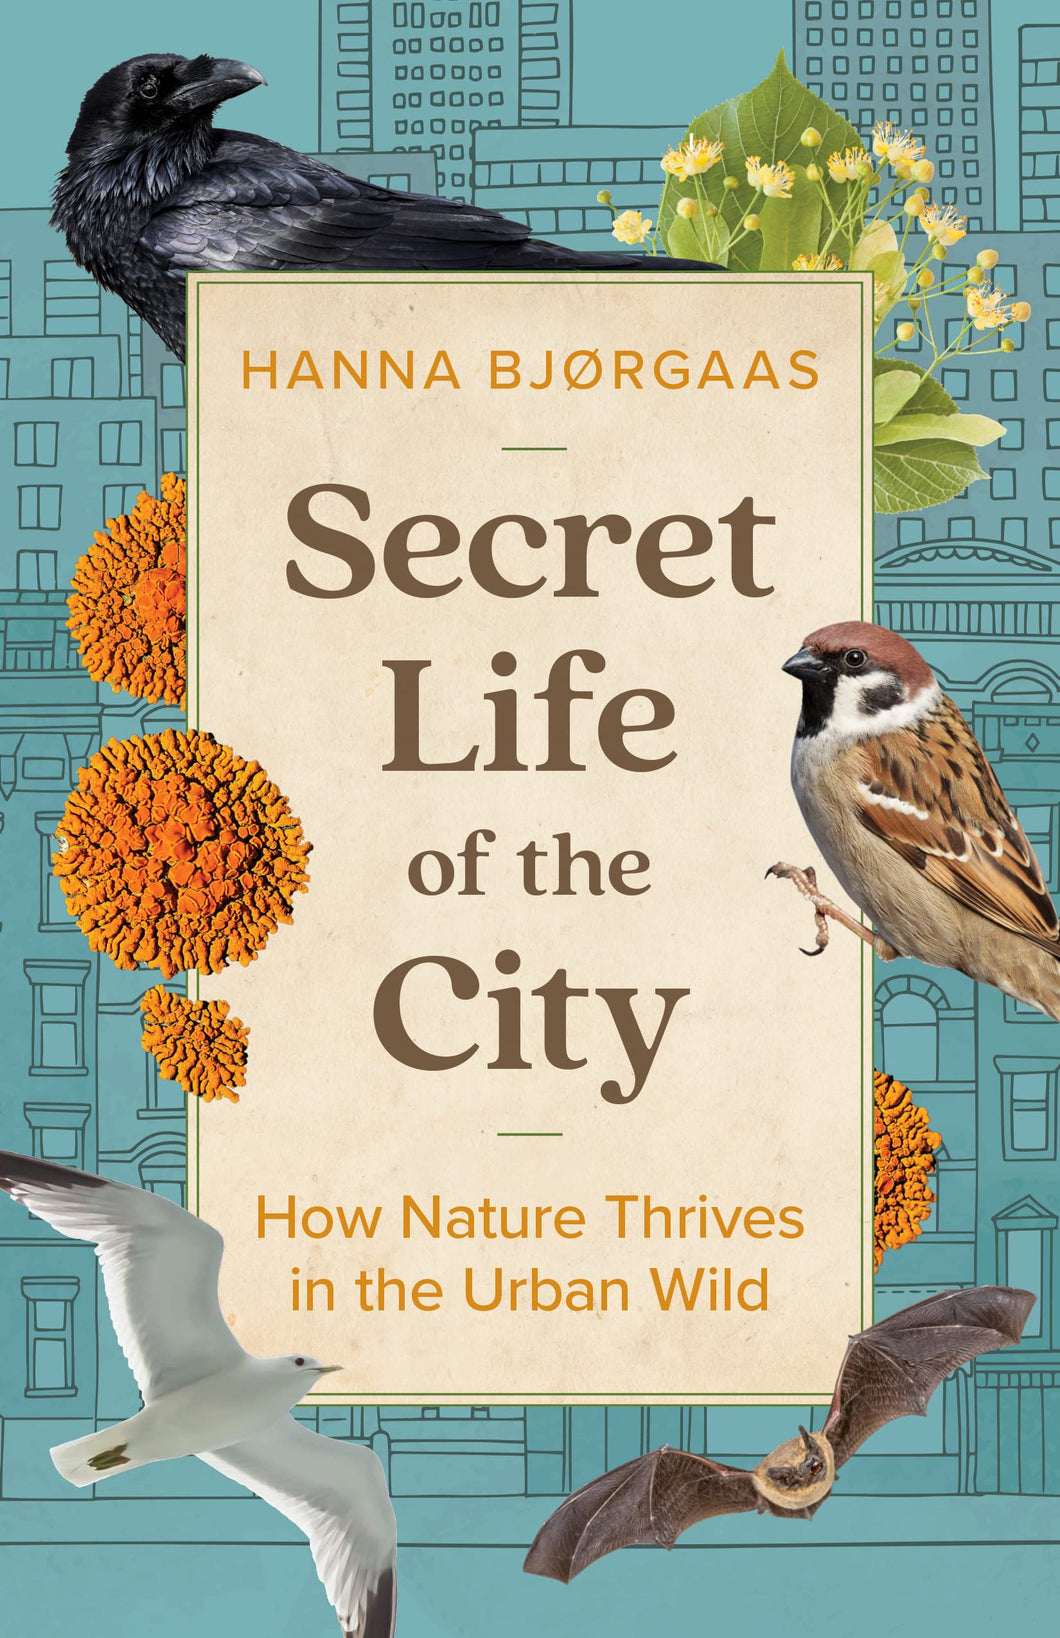 Secret Life Of The City: How Nature Thrives In The Urban Wild [Hanna Bjorgaas]